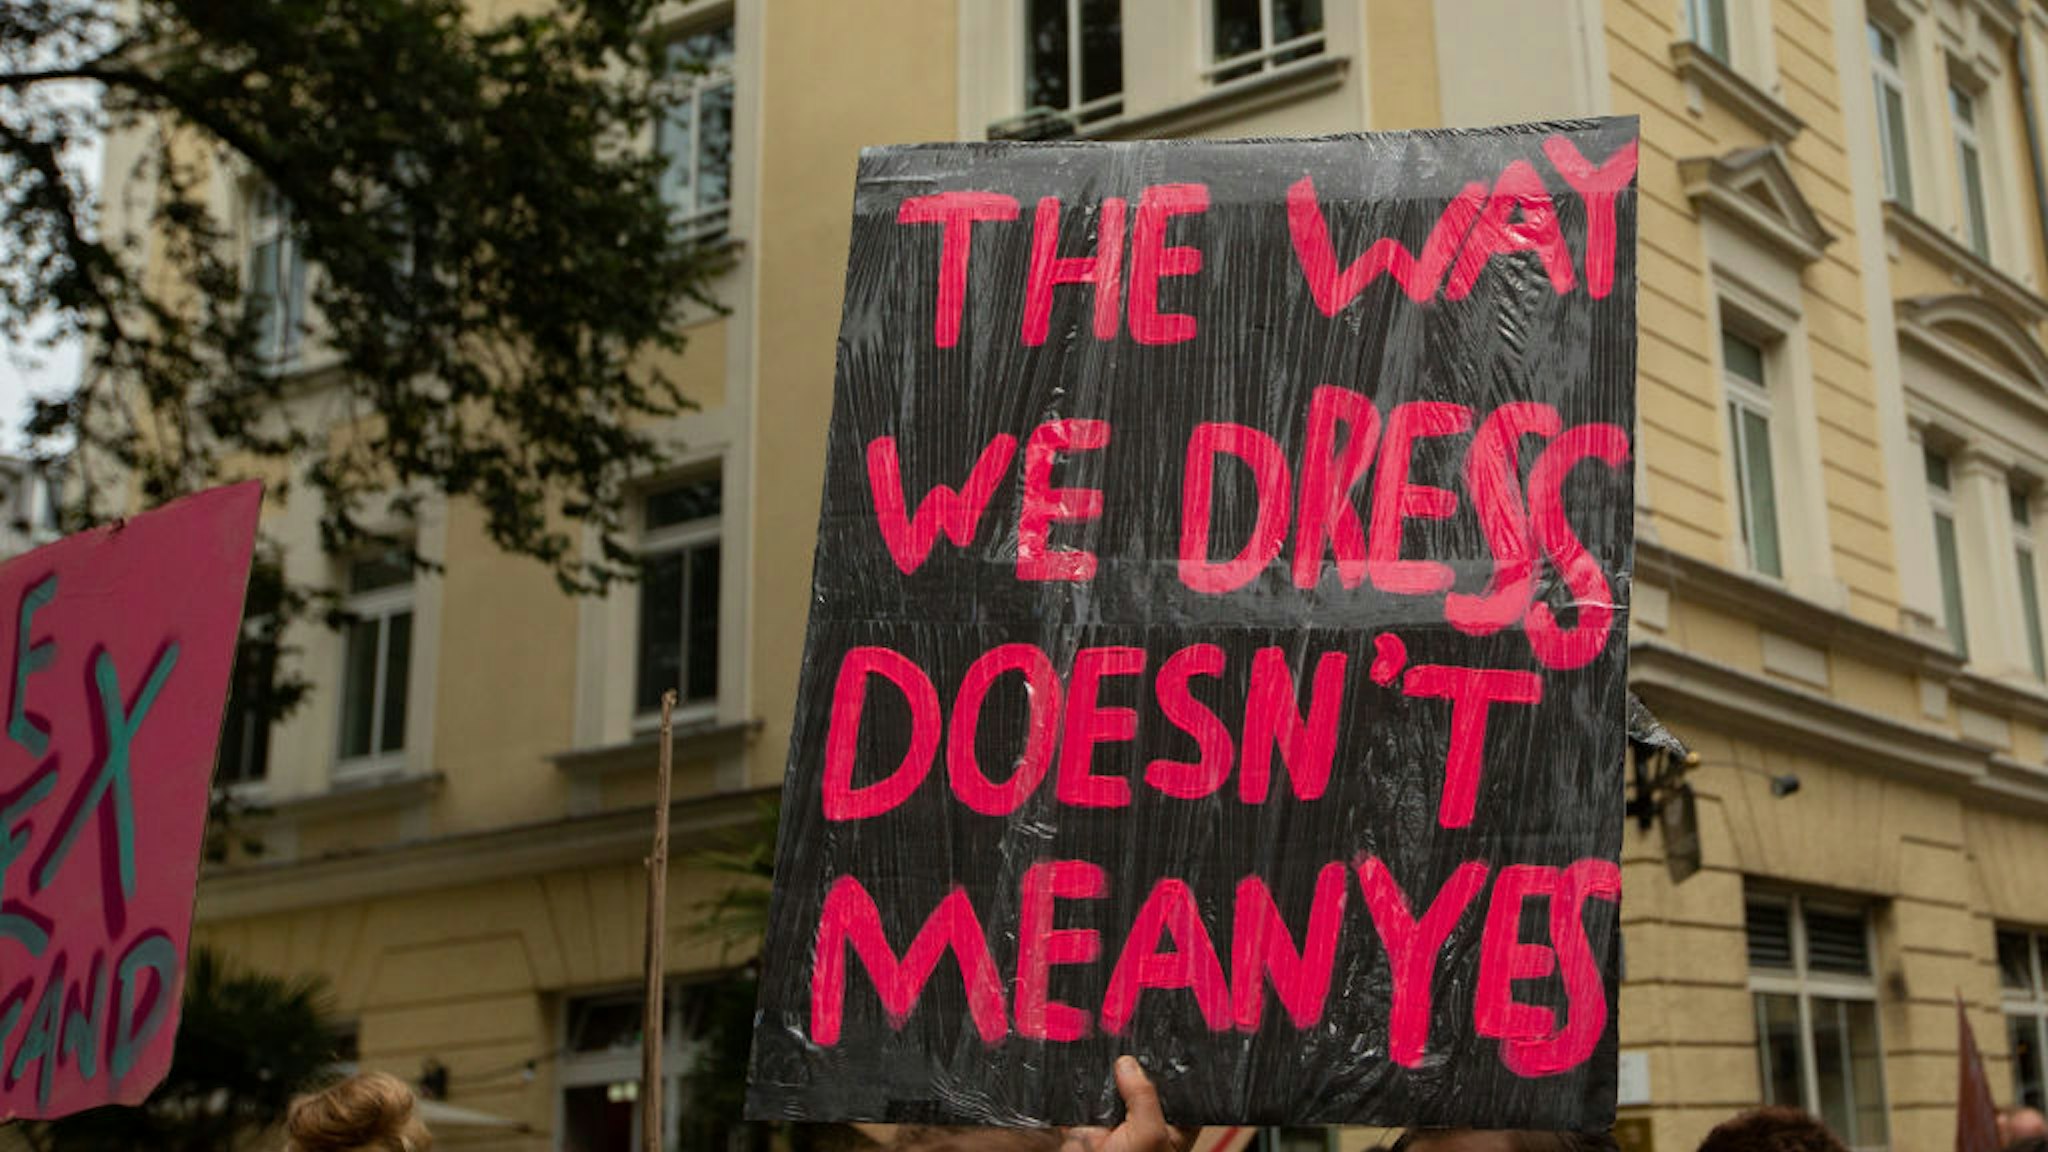 Protestor holds sign saying 'The way we dress doesn't mean yes'. Some 500 people demonstrated through the streets of Munich, Germany, on 21 July 2018 to protest against sexism, rape and sexual harassment. The Slut Walk is a yearly held demonstration all over the world protesting against slut blaming and victim blaming. (Photo by Alexander Pohl/NurPhoto via Getty Images)